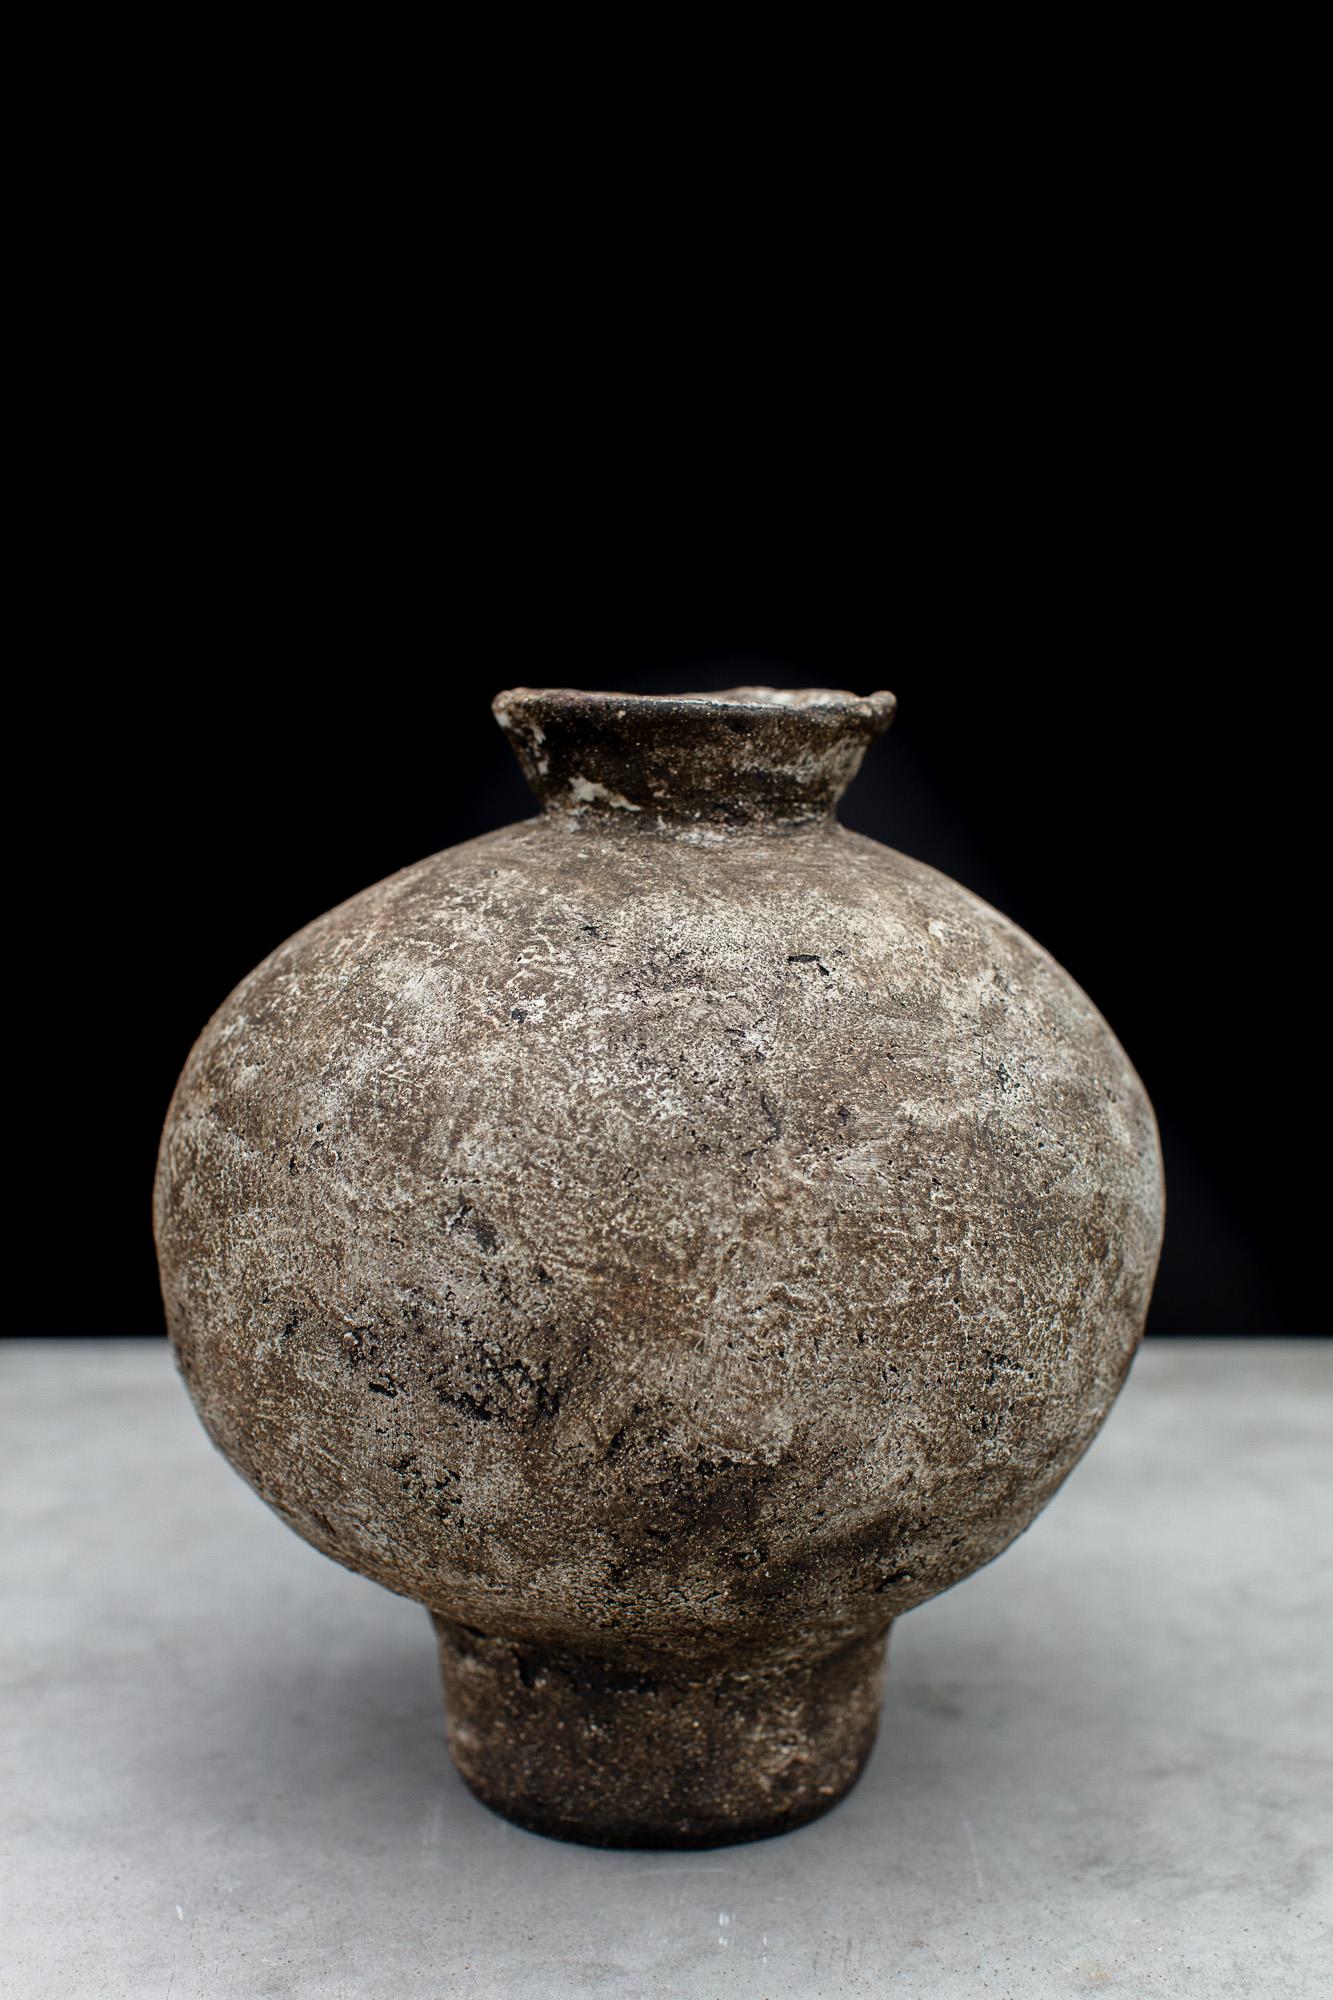 Mugly NYC is a Brooklyn based ceramic studio specializing in richly textured sculptural clay and porcelain that evoke the poetics of the handmade.

This Moon Jar was handmade in 2022 with highly textured sculpture clay and porcelain slip, the